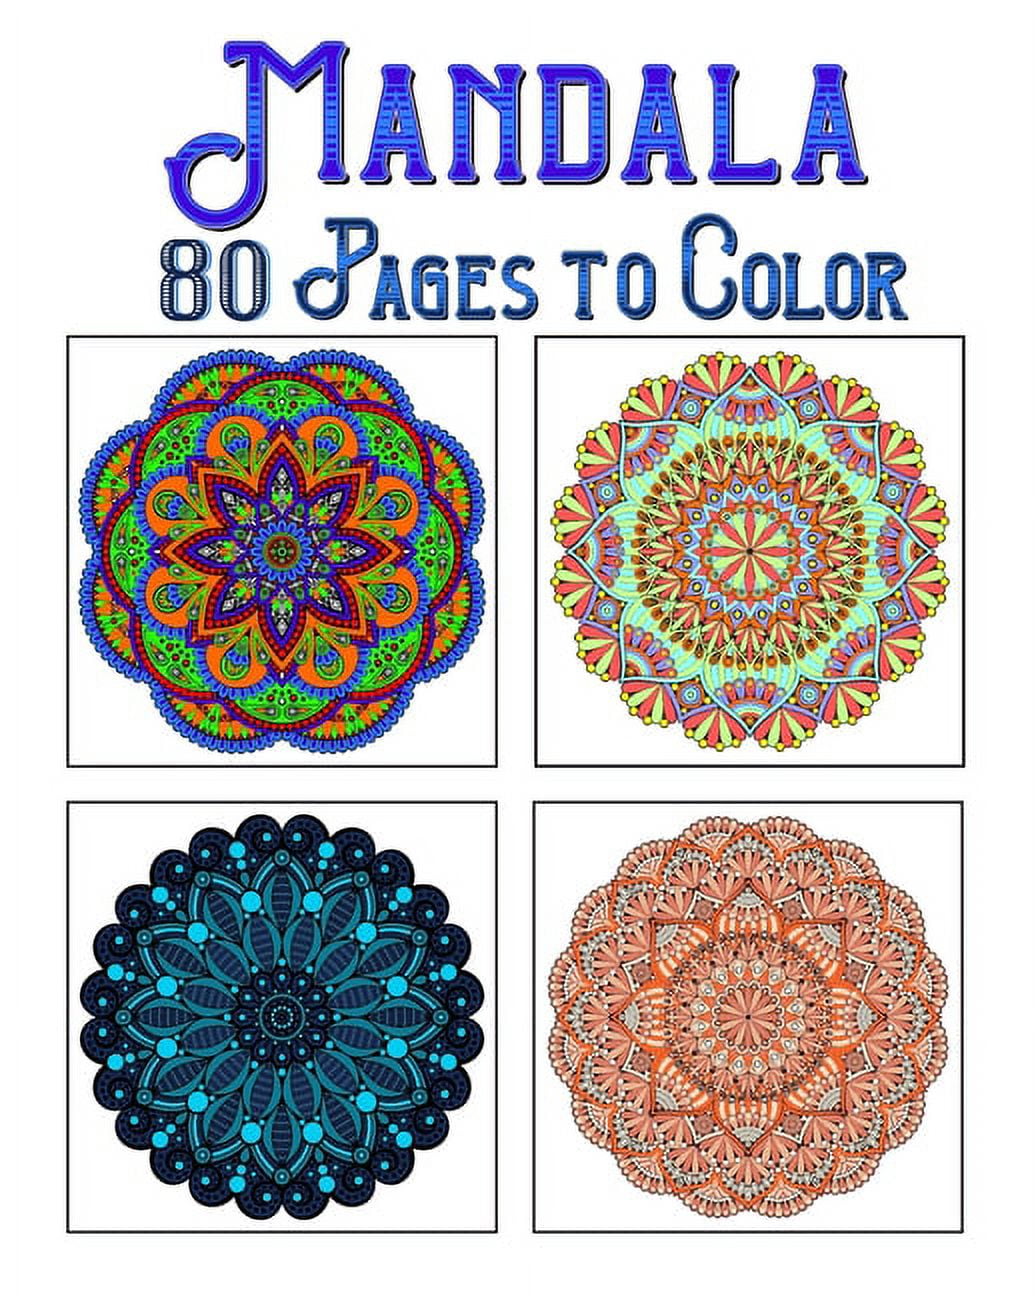 Adult Coloring Book Designs: Stress Relief Coloring Book: 80 Images  including Animals, Mandalas, Paisley Patterns, Garden Designs a book by  Adult Coloring Books